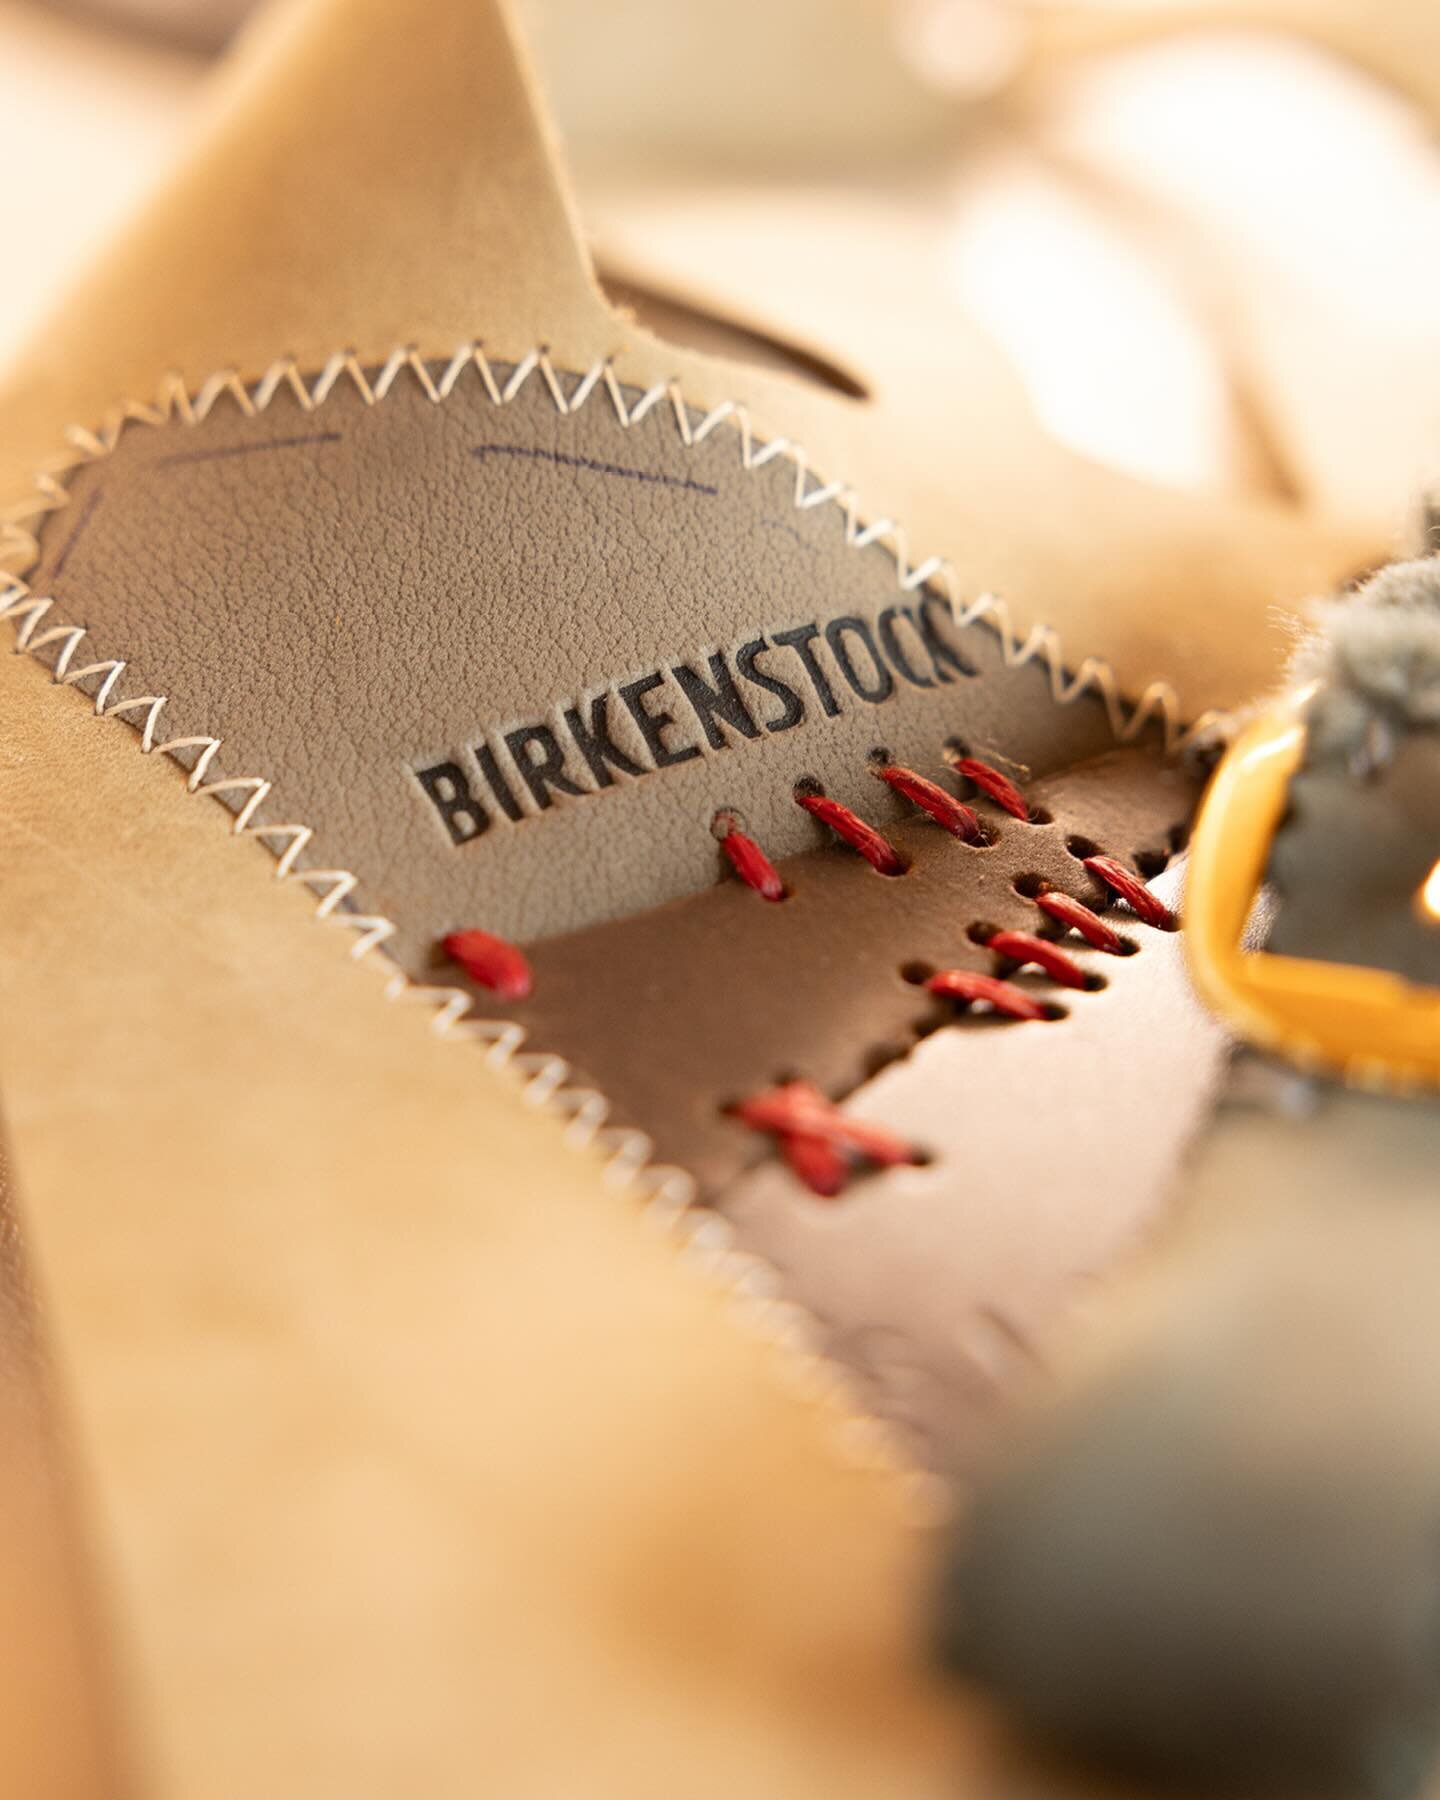 Join us at our @birkenstock workshops throughout March in the Birkenstock Studio, Shoreditch. 

Chat with us and other likeminded creatives while focusing on handcrafting off cut leathers using traditional techniques.

Sign up via the link in stories